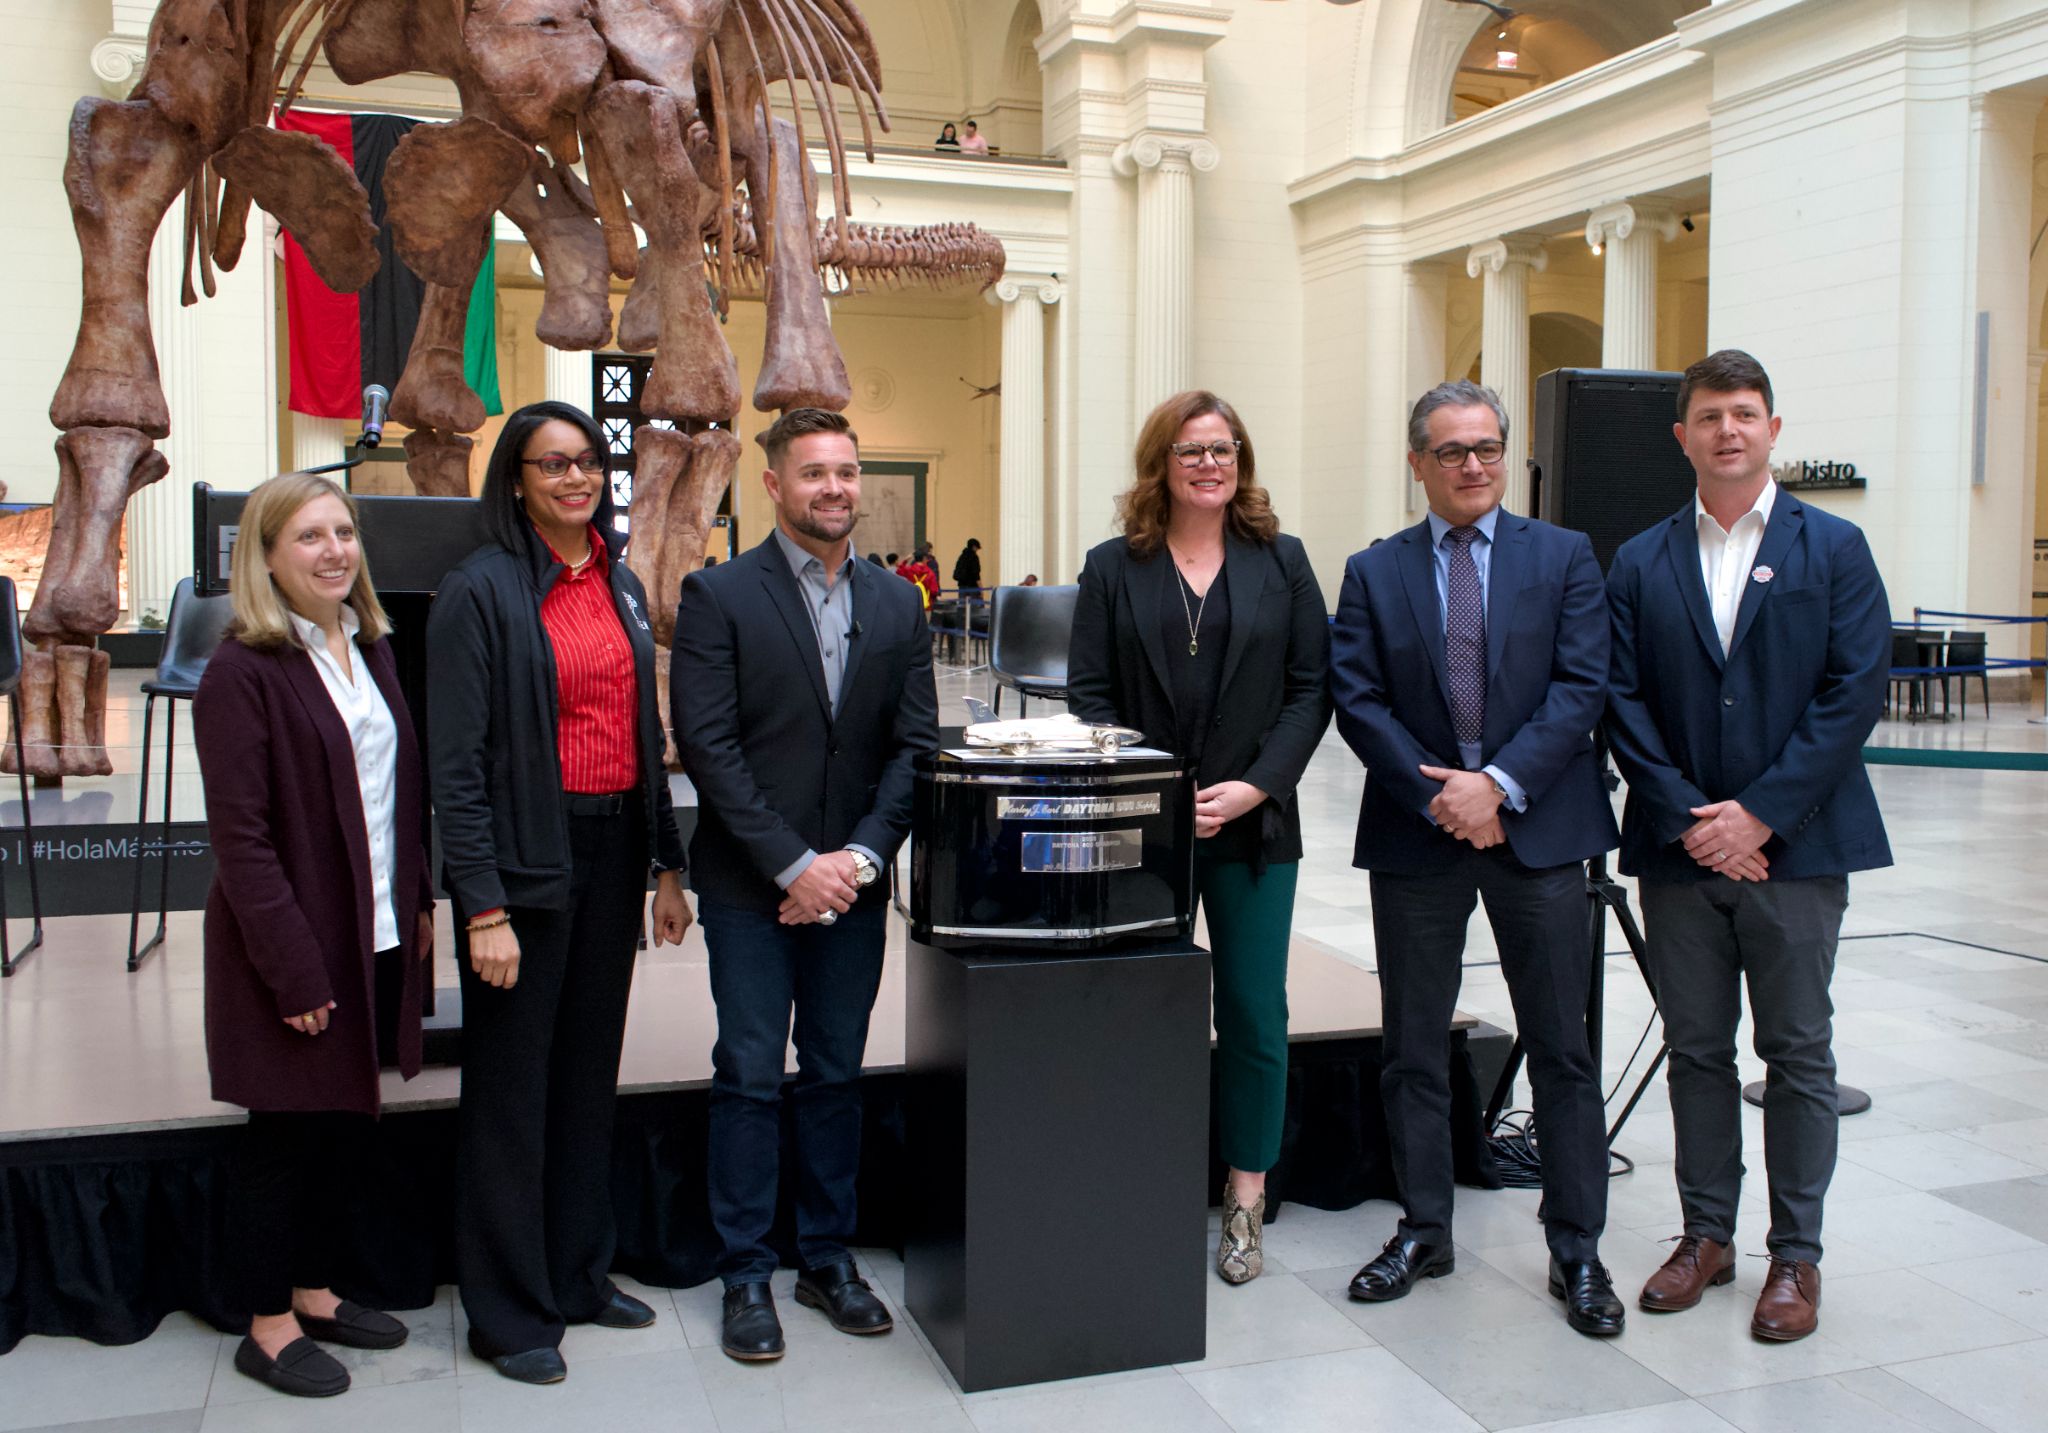 Six people stand beside a podium with a dinosaur fossil behind them.